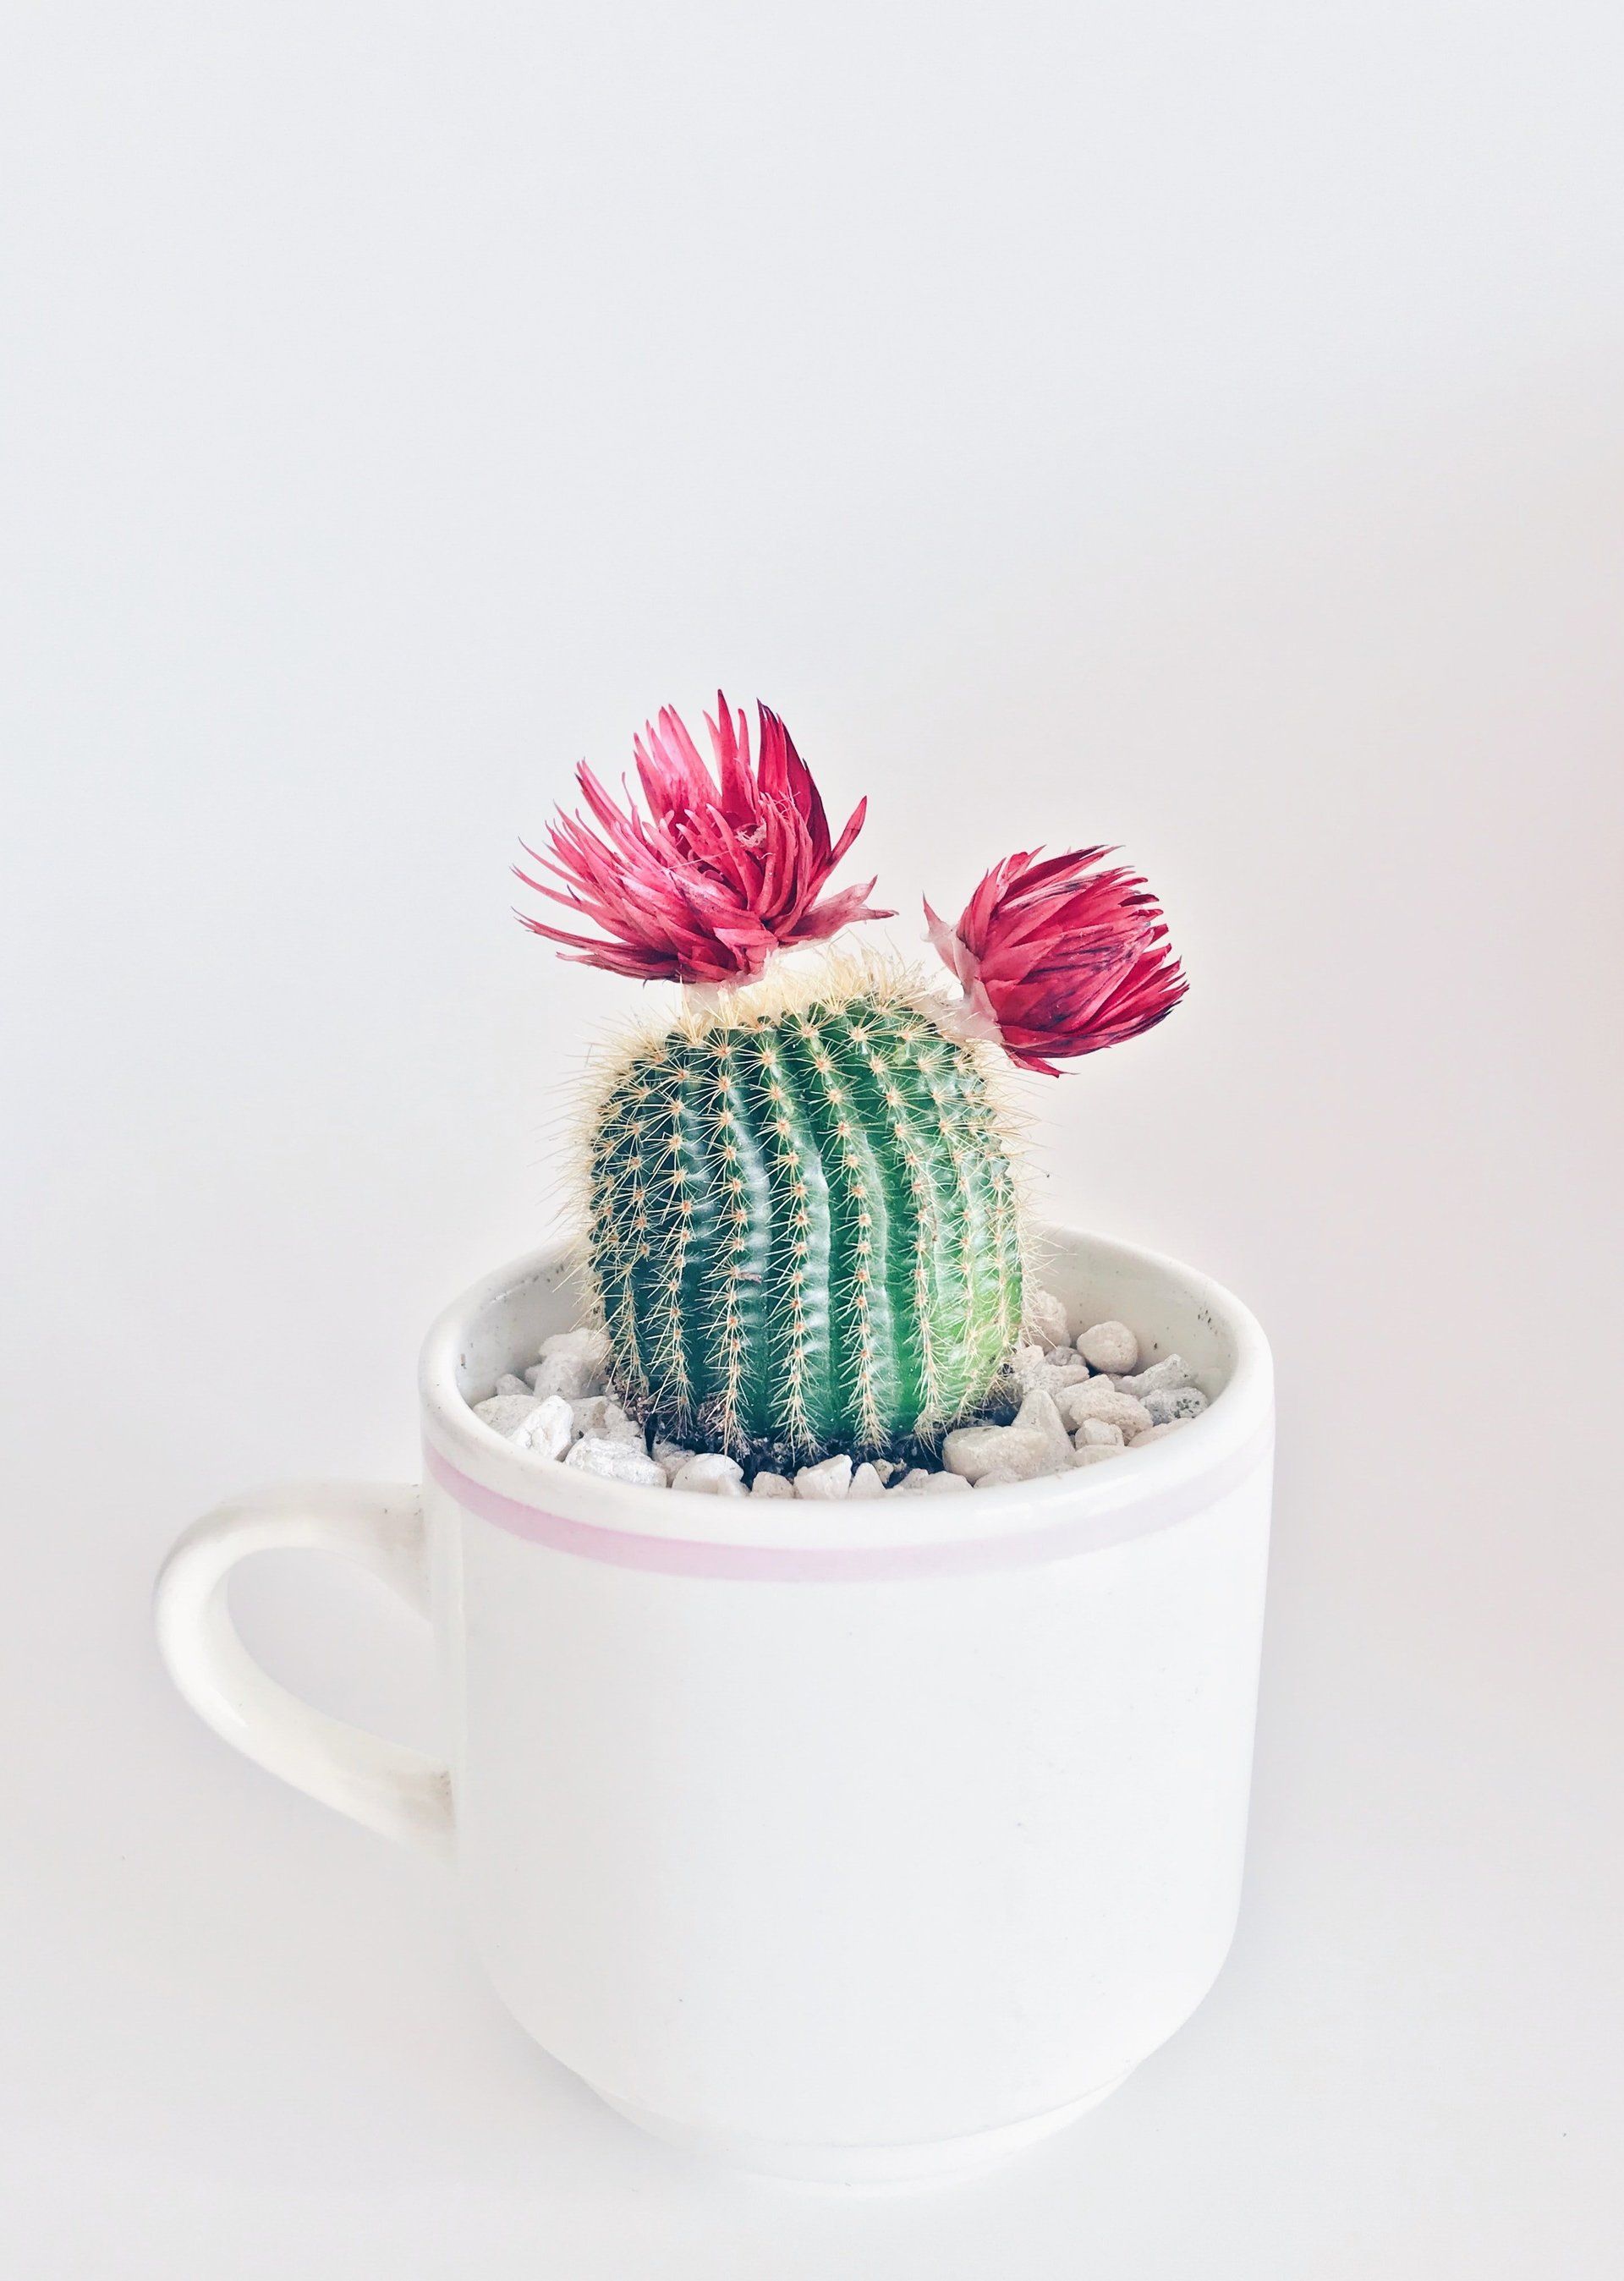 A mini green succulent with pink flowers, planted in a white coffee/tea cup/mug.